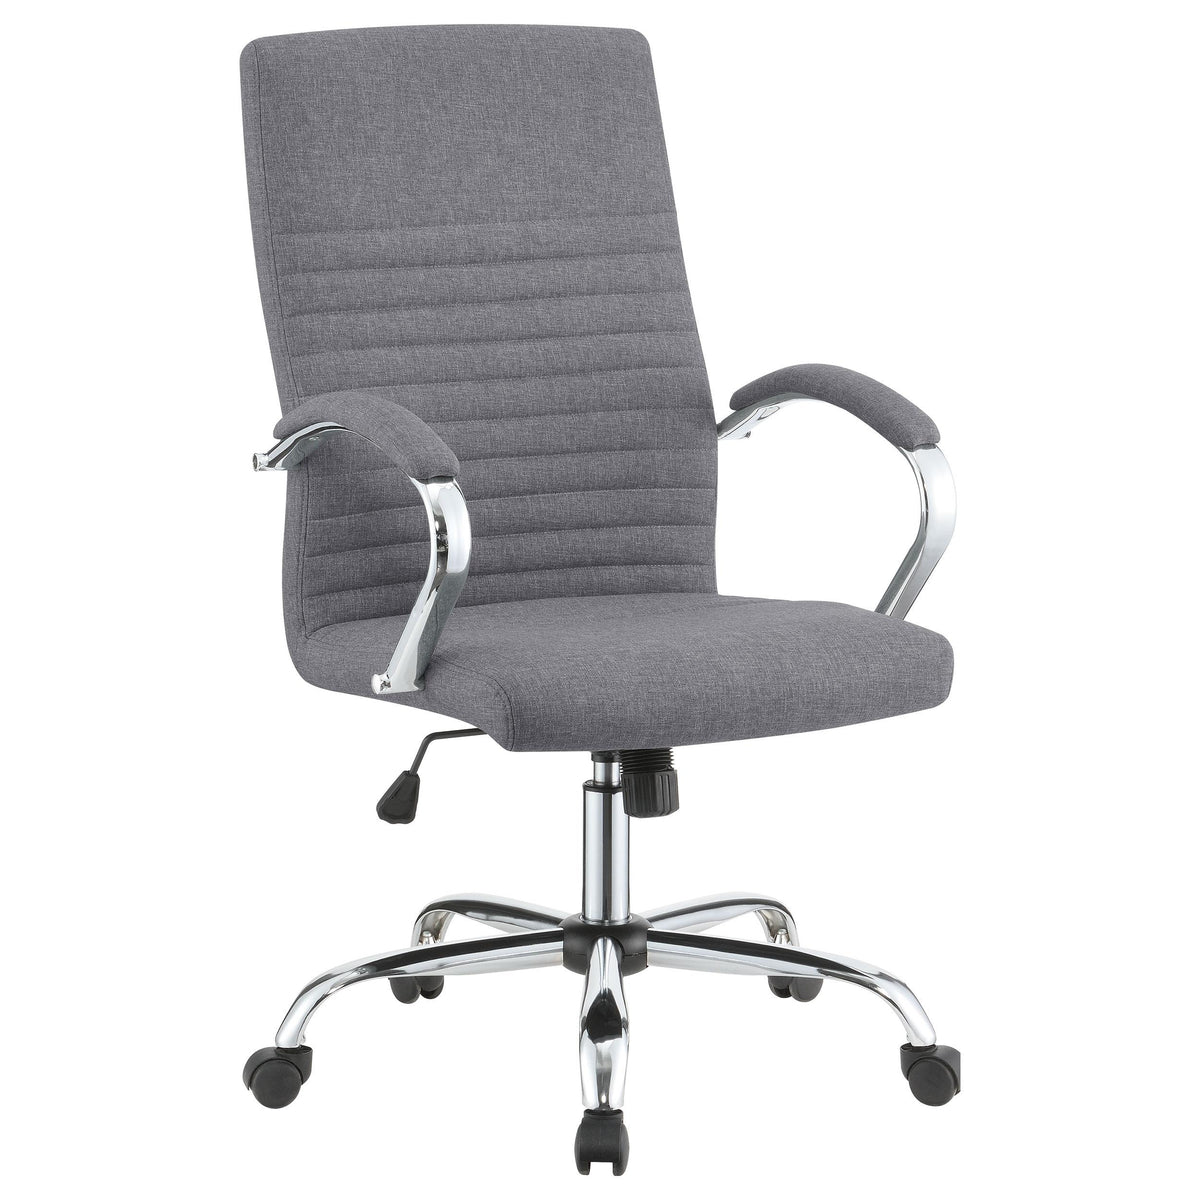 Abisko Upholstered Office Chair with Casters Grey and Chrome Abisko Upholstered Office Chair with Casters Grey and Chrome 